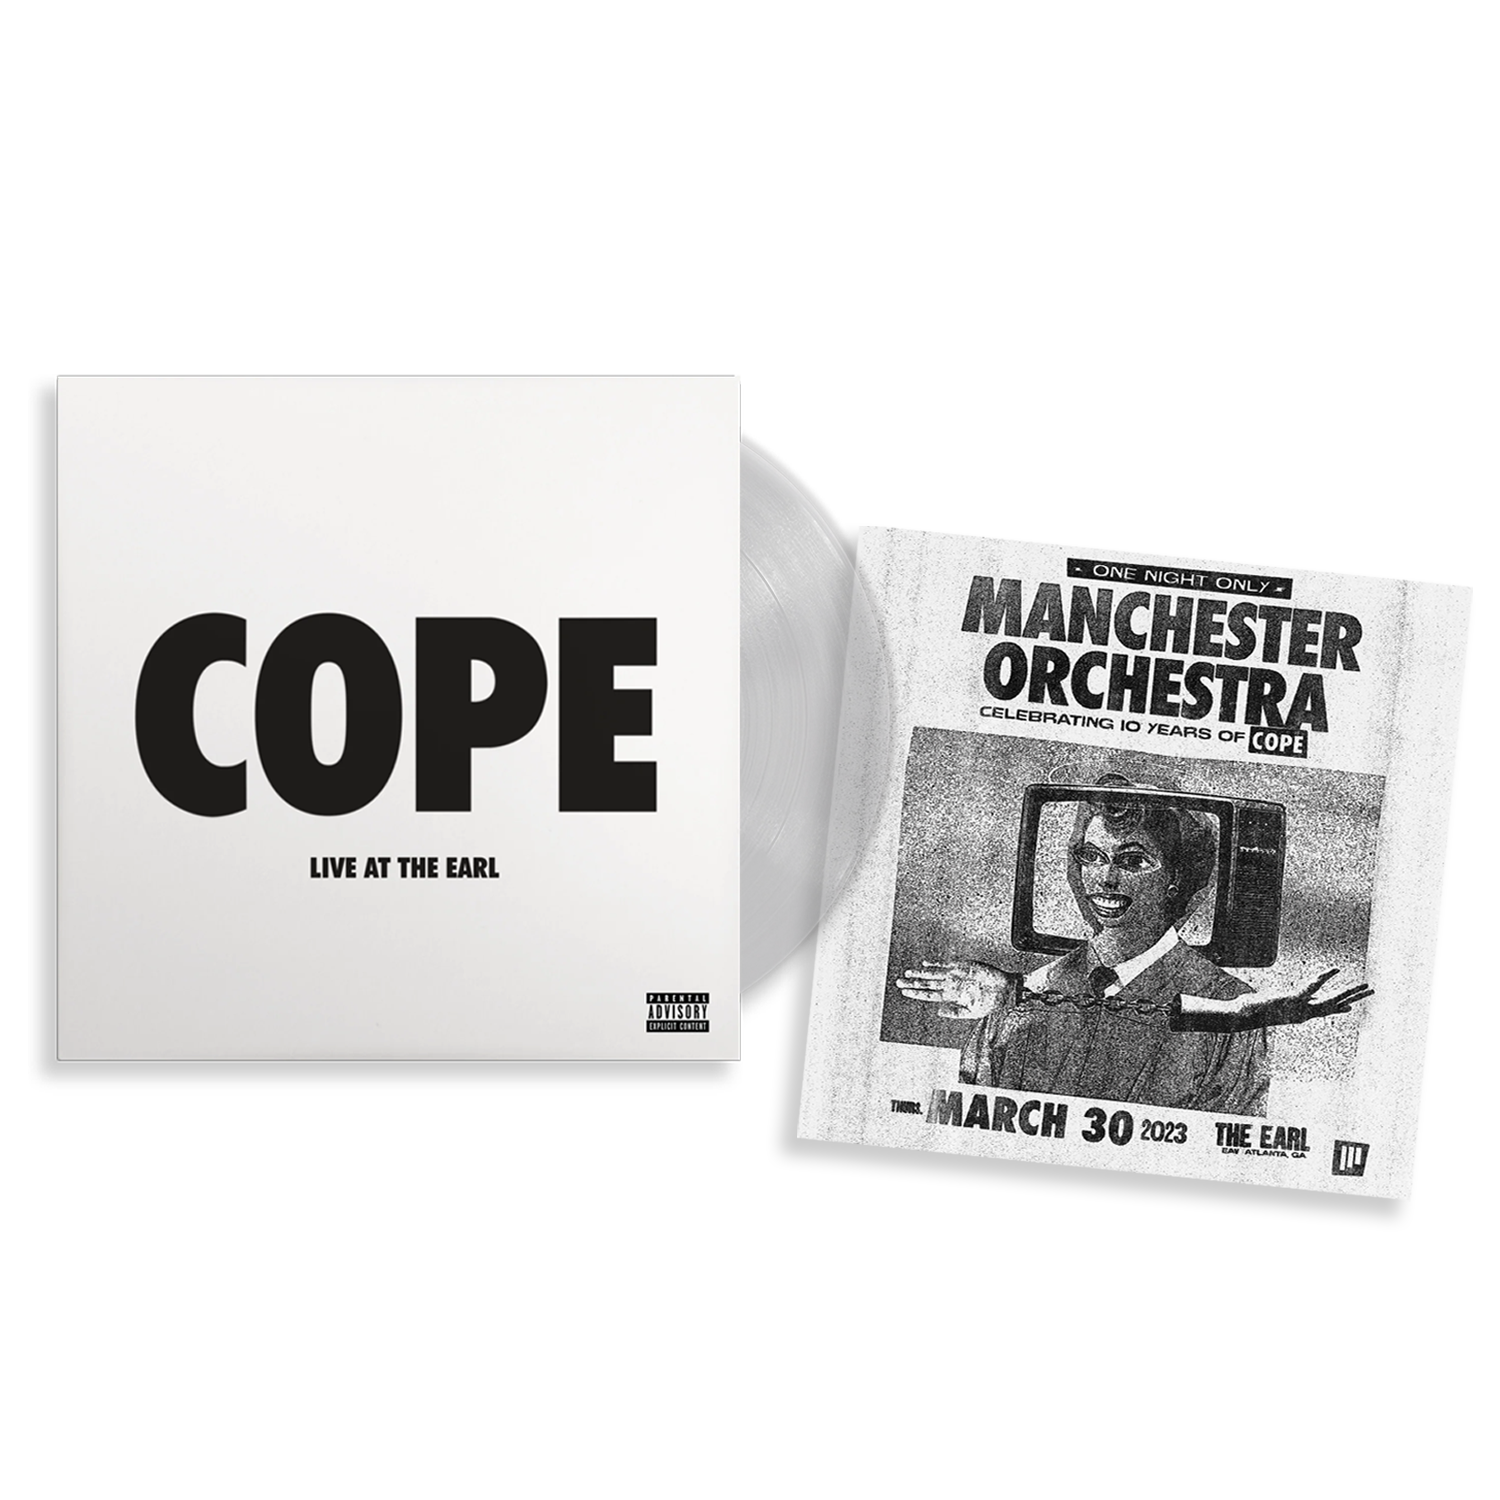 COPE - Live at The Earl: Limited Clear Vinyl LP + Exclusive Print